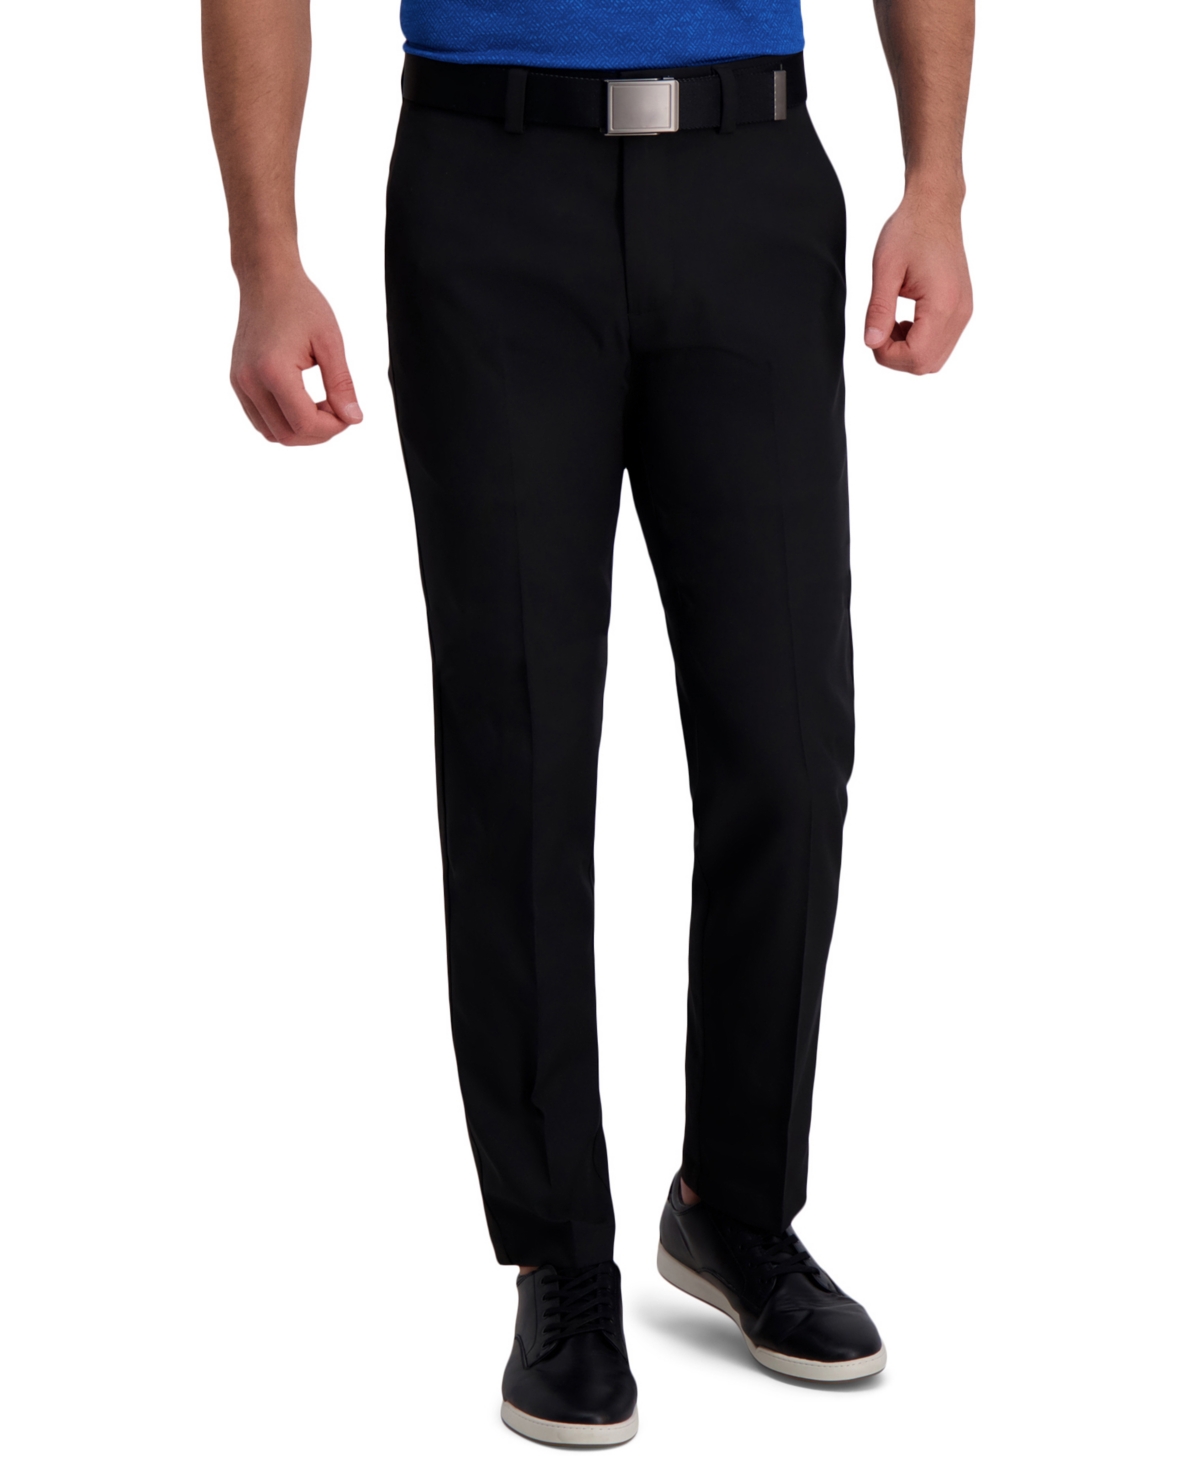 Cool Right Performance Flex Straight Fit Flat Front Pant - String